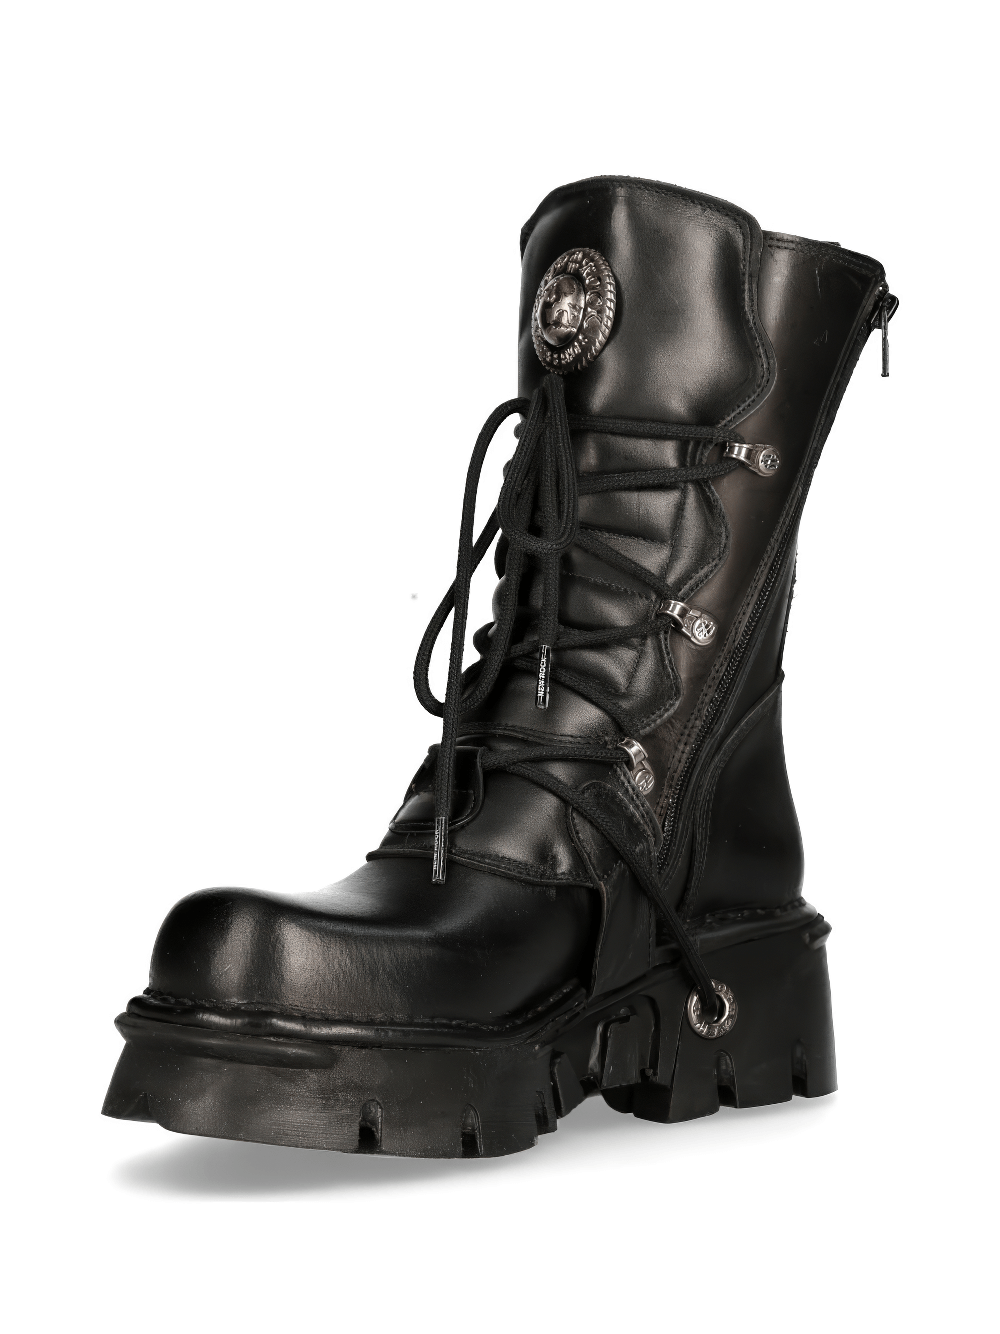 NEW ROCK Unisex Gothic Black Boots with Metallic Accents